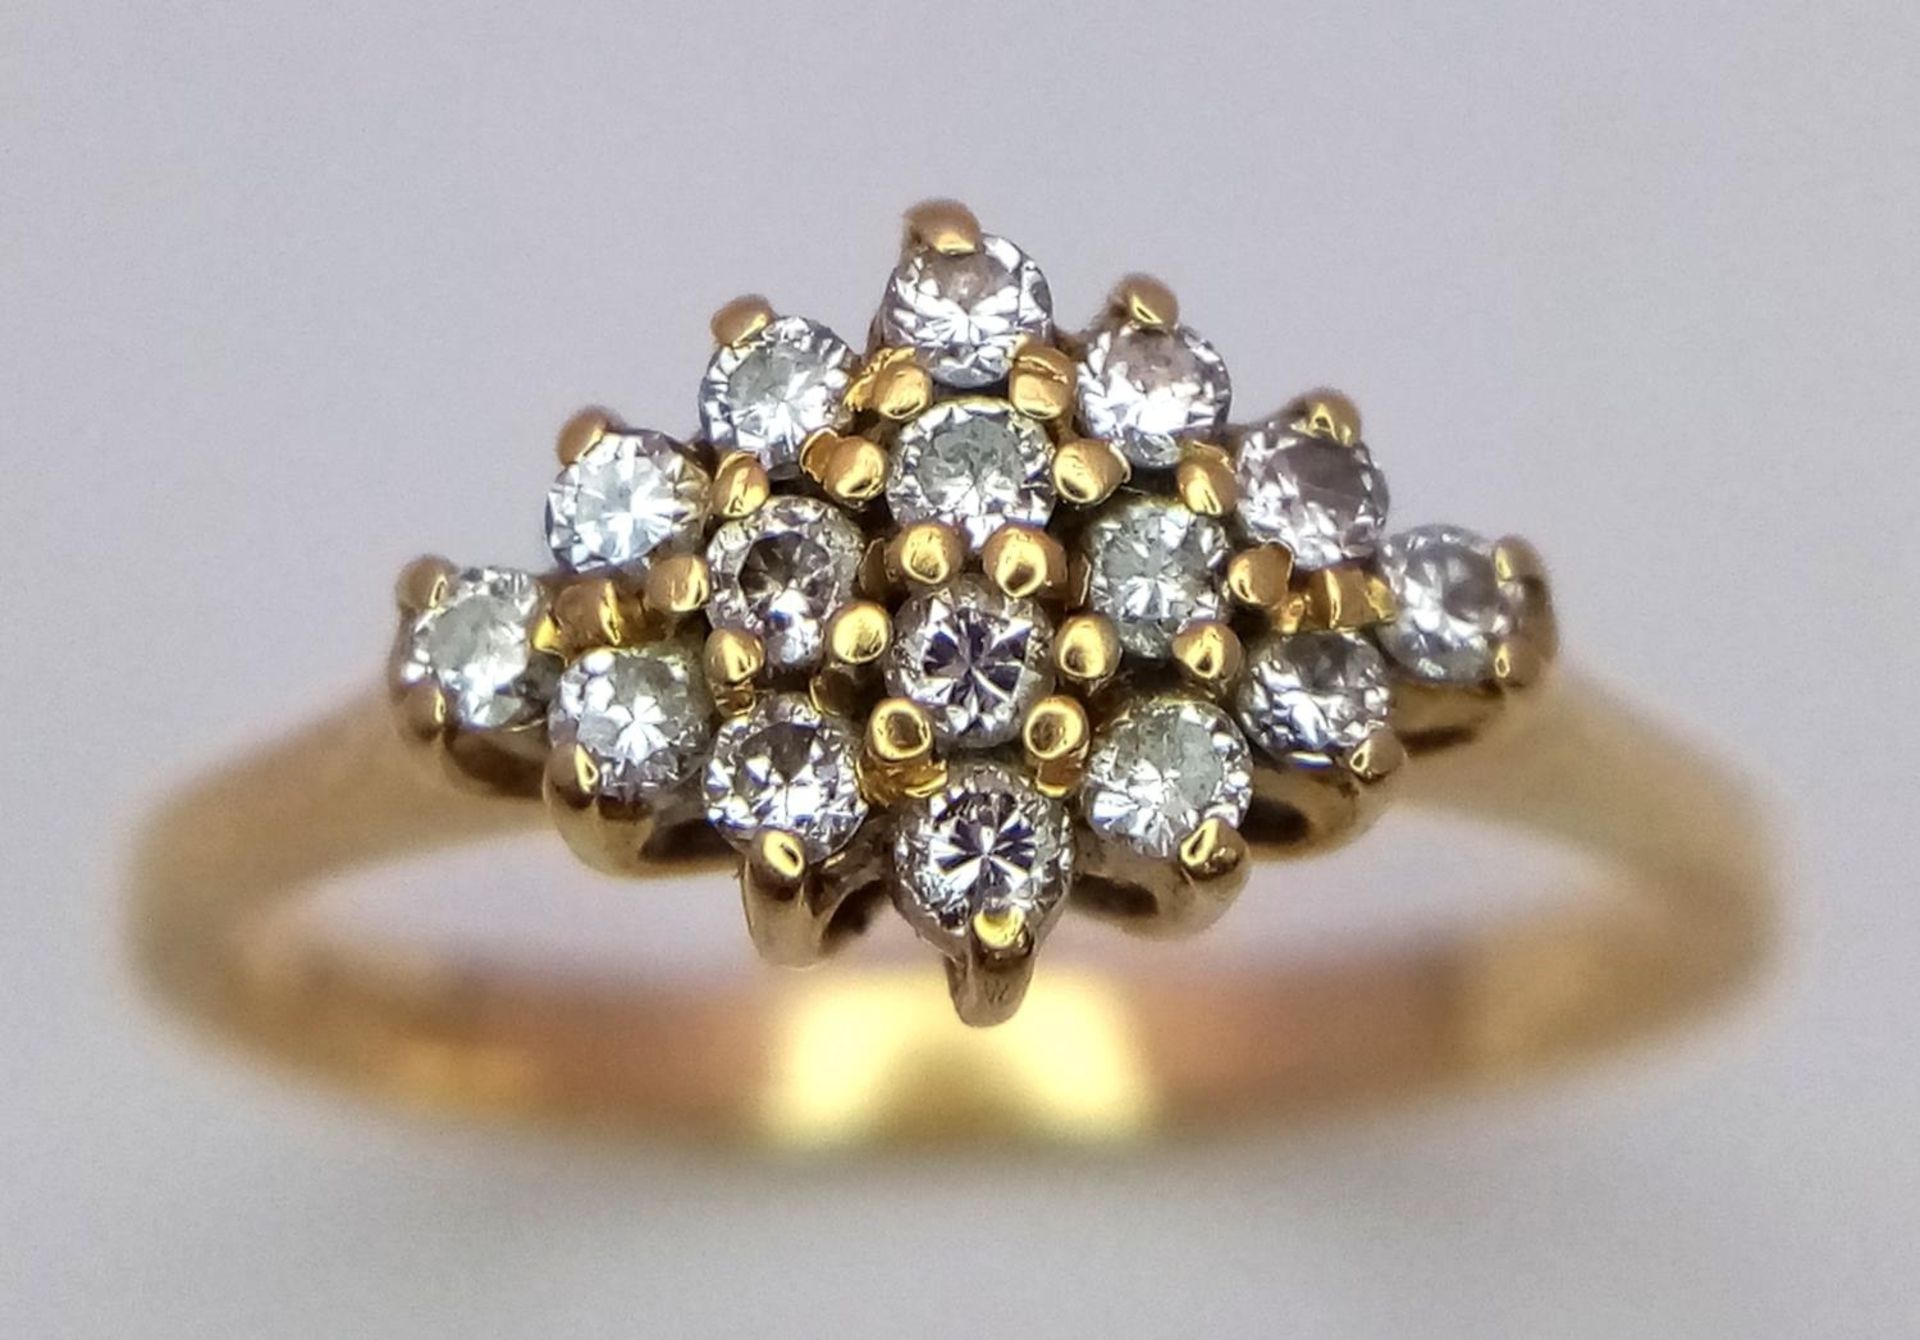 A 18K YELLOW GOLD DIAMOND CLUSTER RING 0.25CT 2.9G SIZE N A/S 1026 - Image 2 of 5